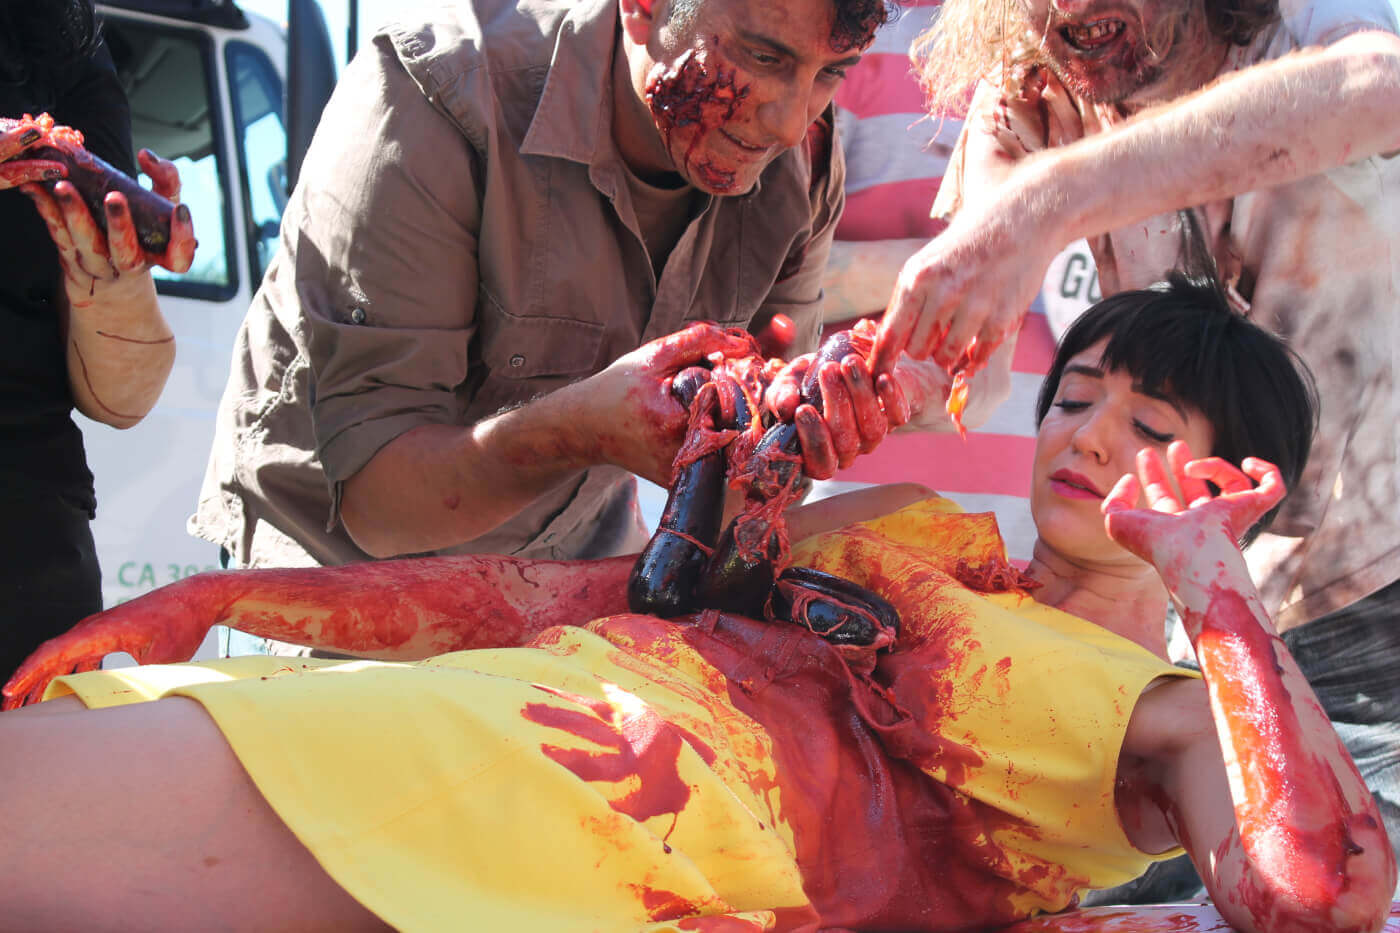 Passersby Are Horrified as ‘Zombies’ Feast on ‘Human Flesh’ on the Hollywood Walk of Fame (Photos) | Blog | PETA Latino